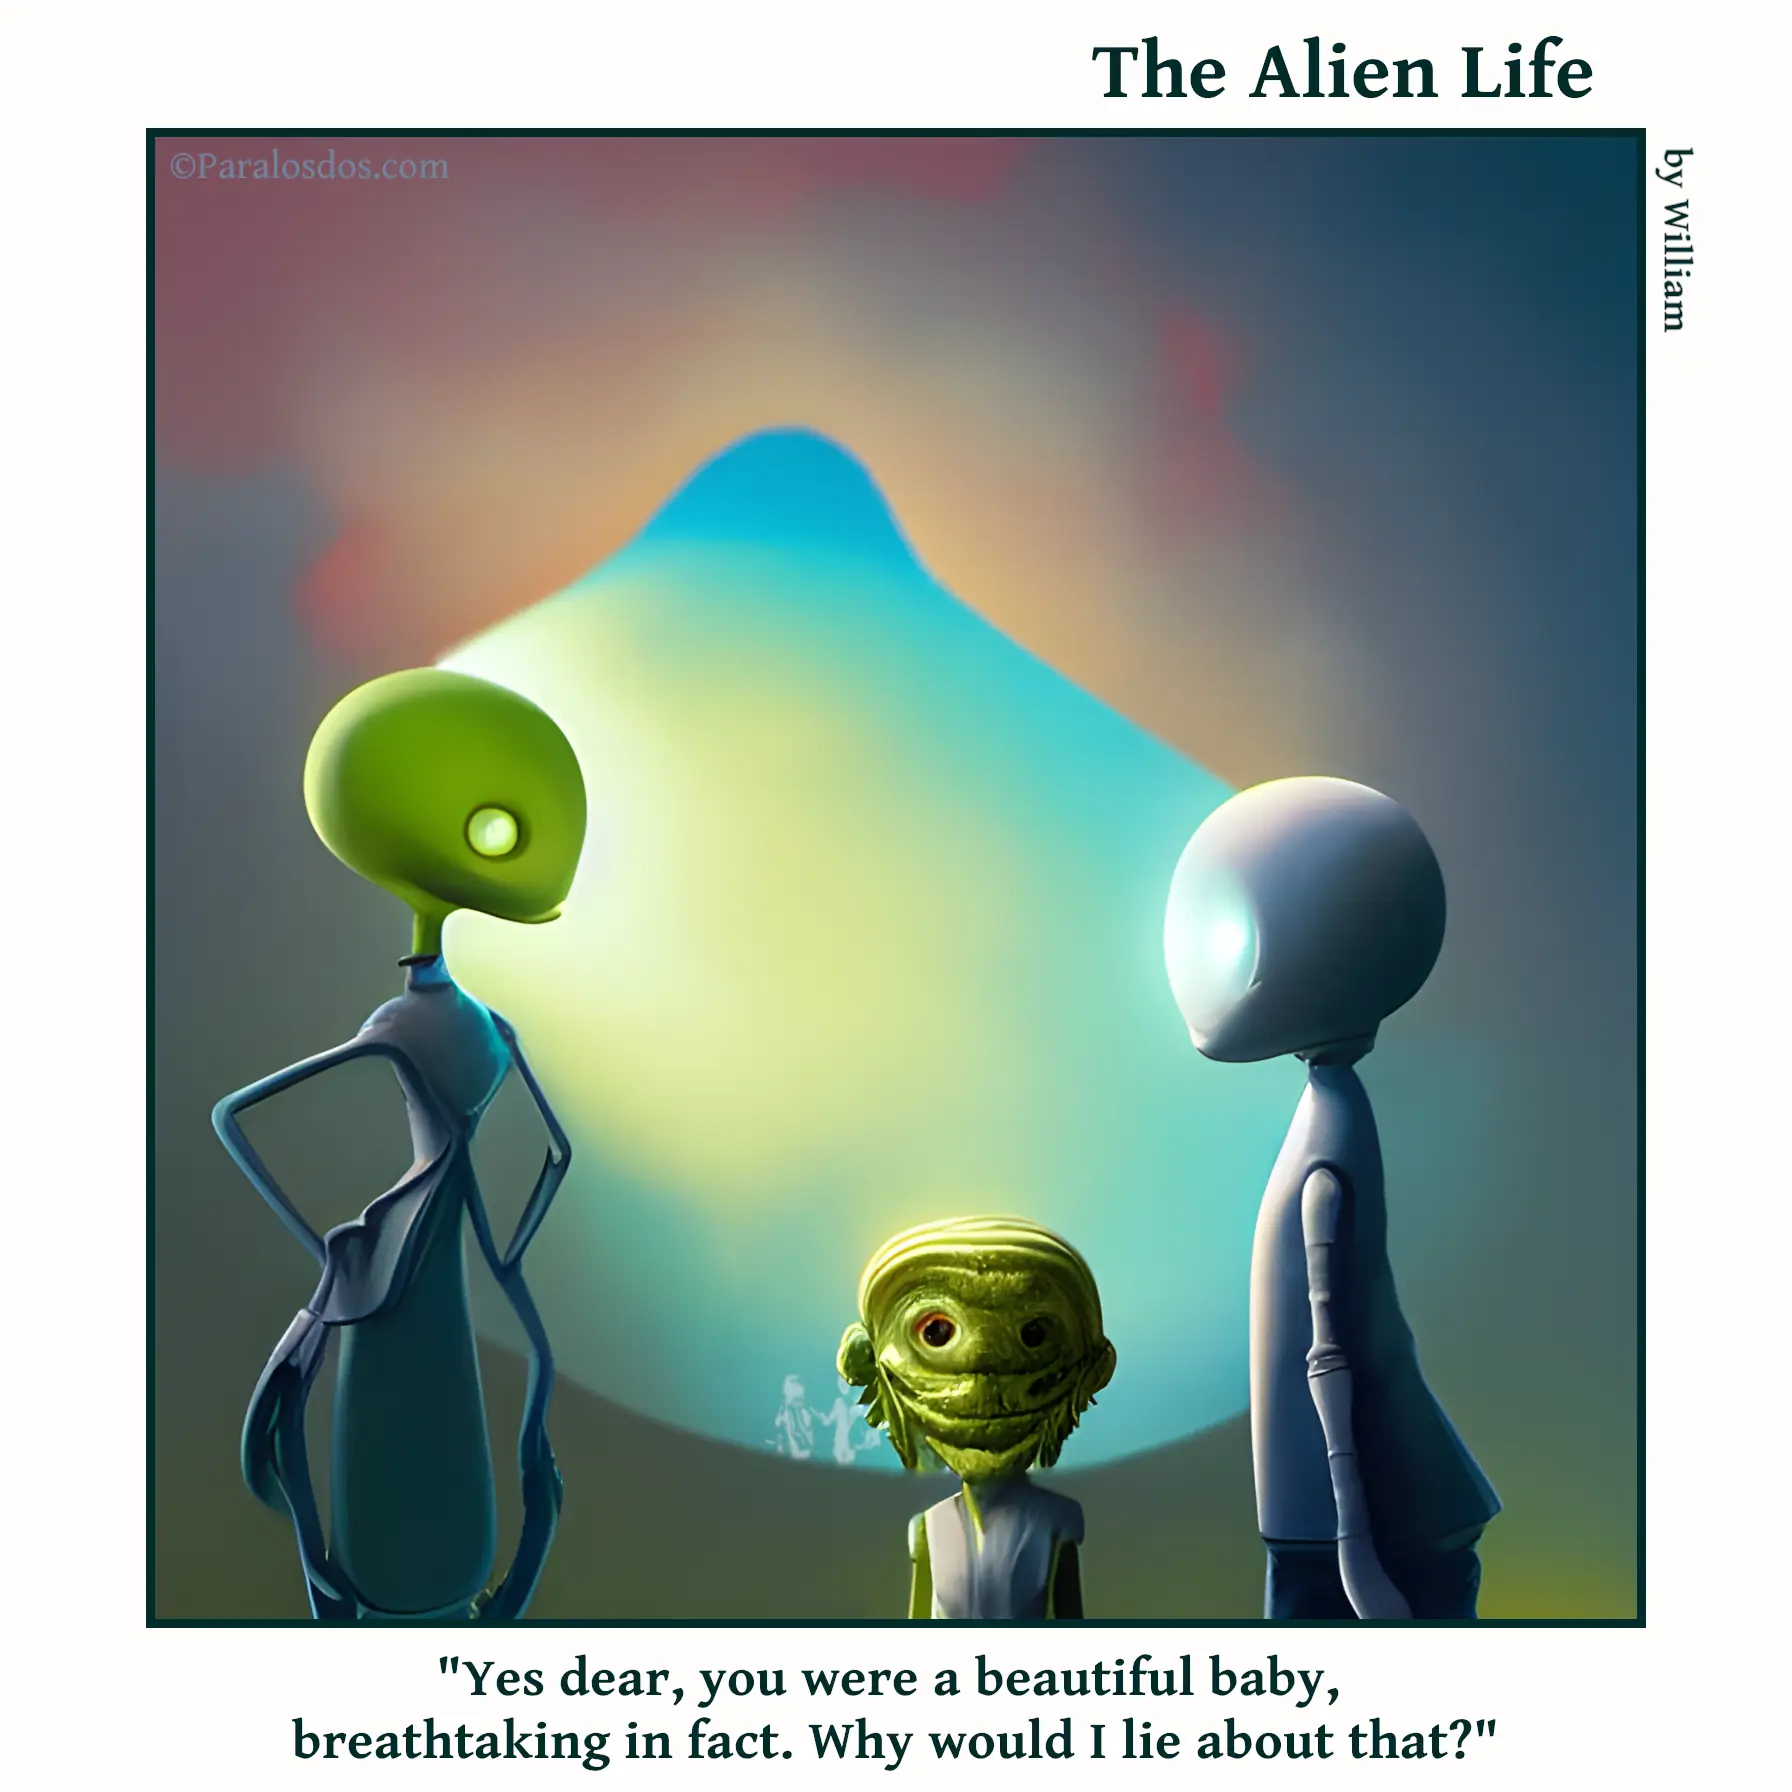 The Alien Life, one panel Comic. A very unfortunate looking alien child is standing between two alien adults. The caption reads:"Yes dear, you were a beautiful baby, breathtaking in fact. Why would I lie about that?"